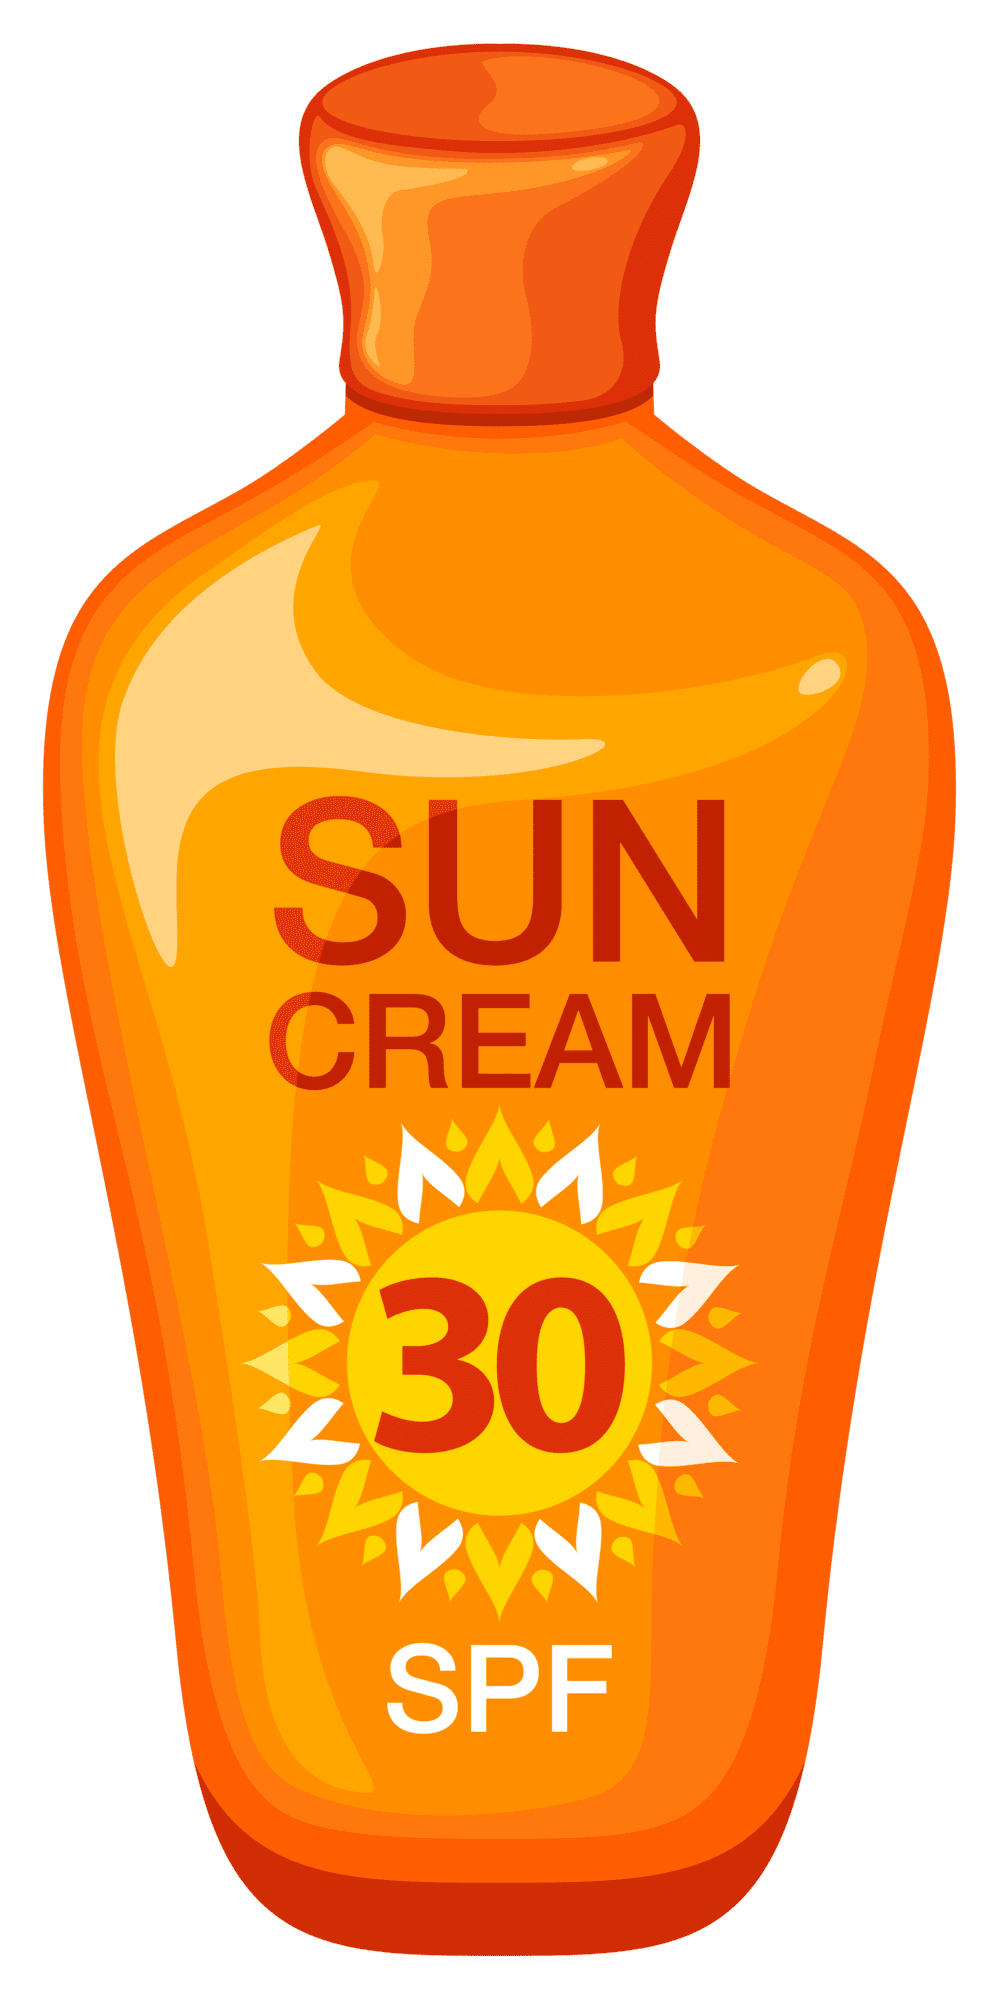 Sunscreen picture high quality clipart